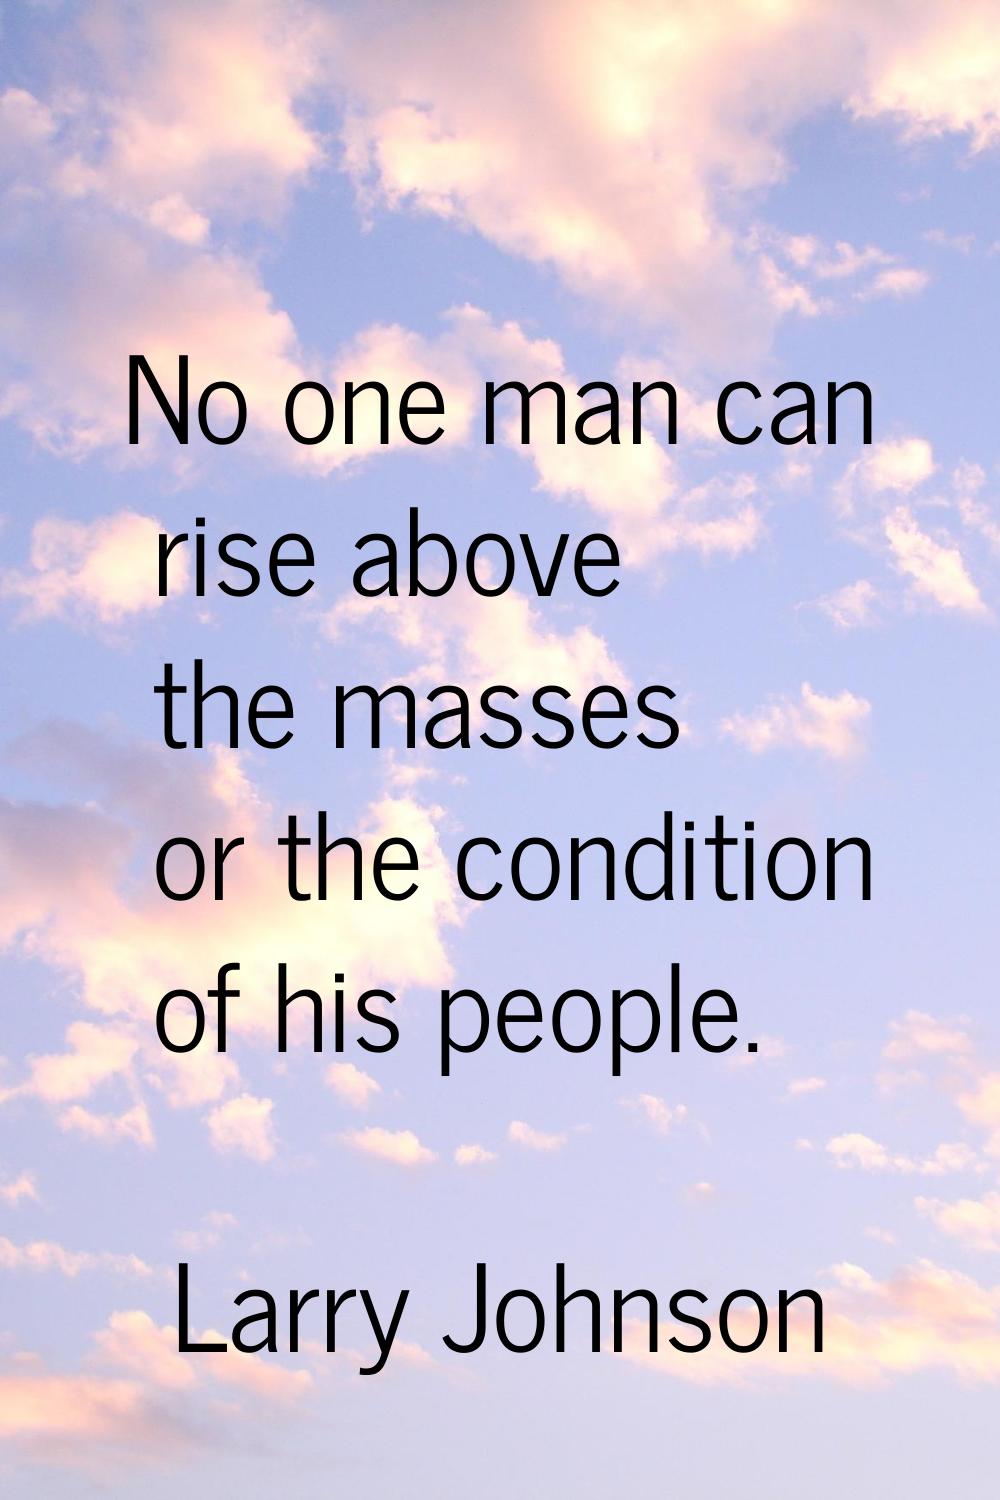 No one man can rise above the masses or the condition of his people.